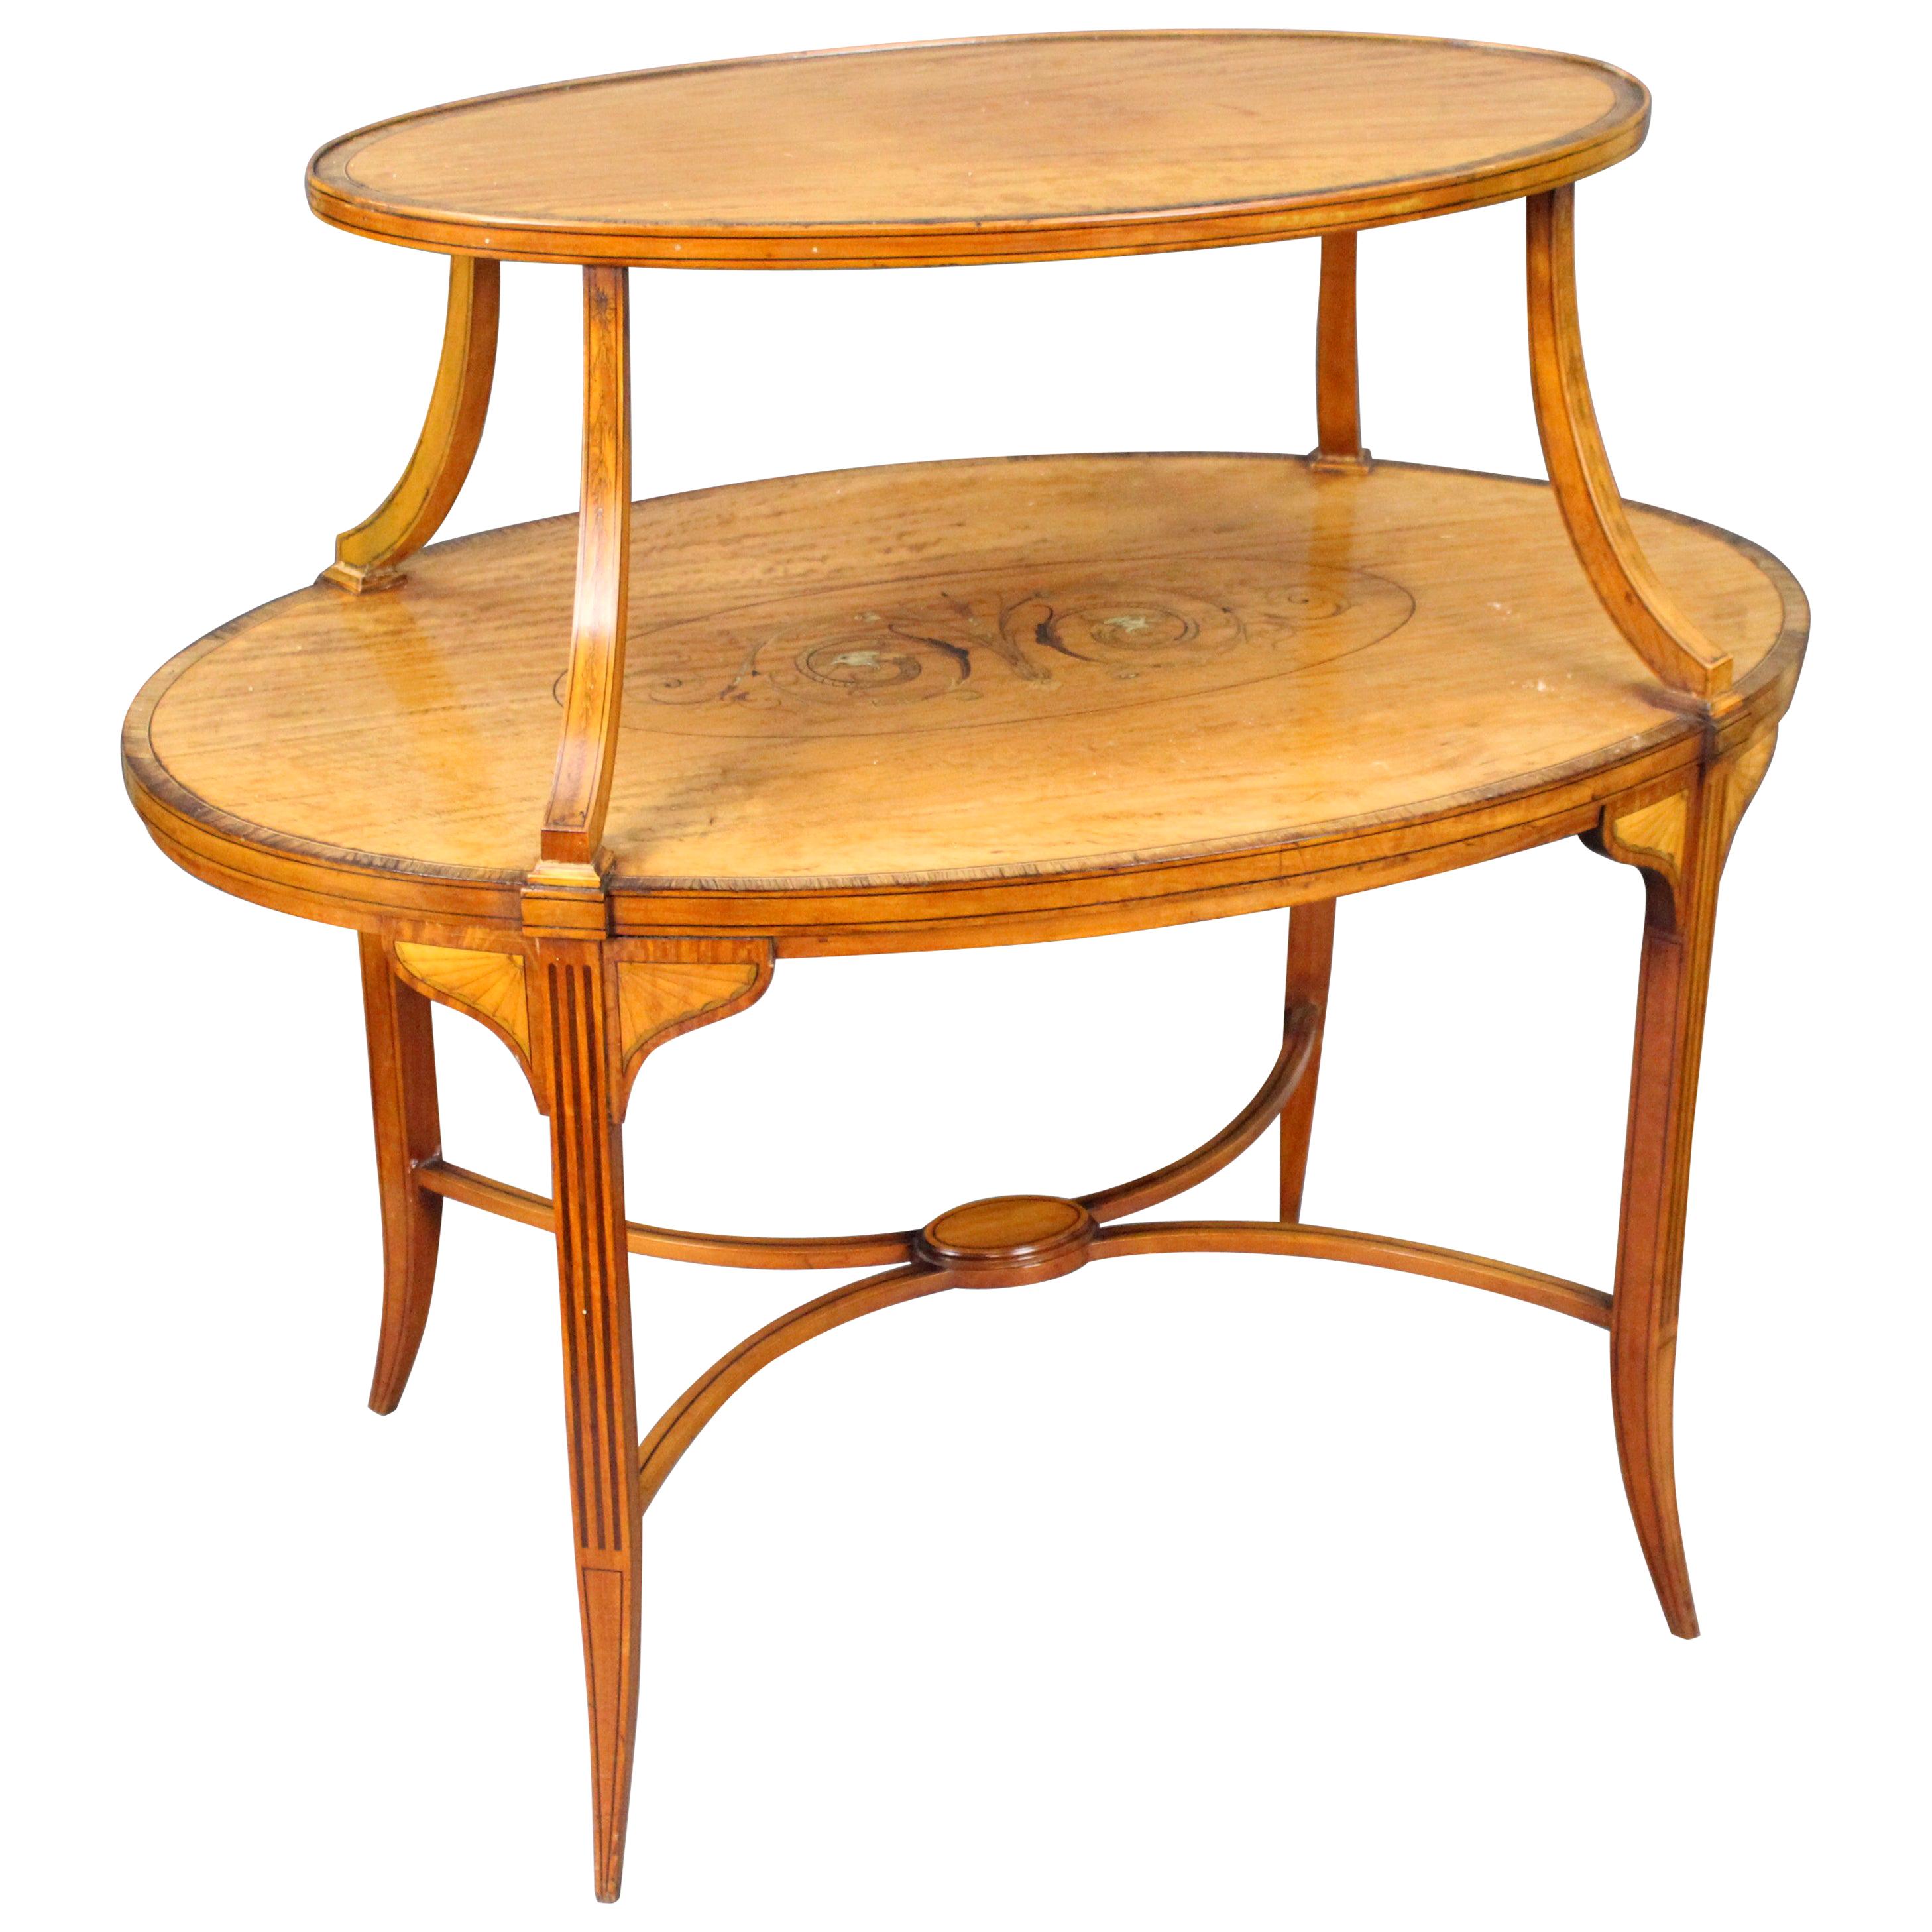 English Inlaid Satinwood Étagère Two-Tier Table, circa 1890 For Sale